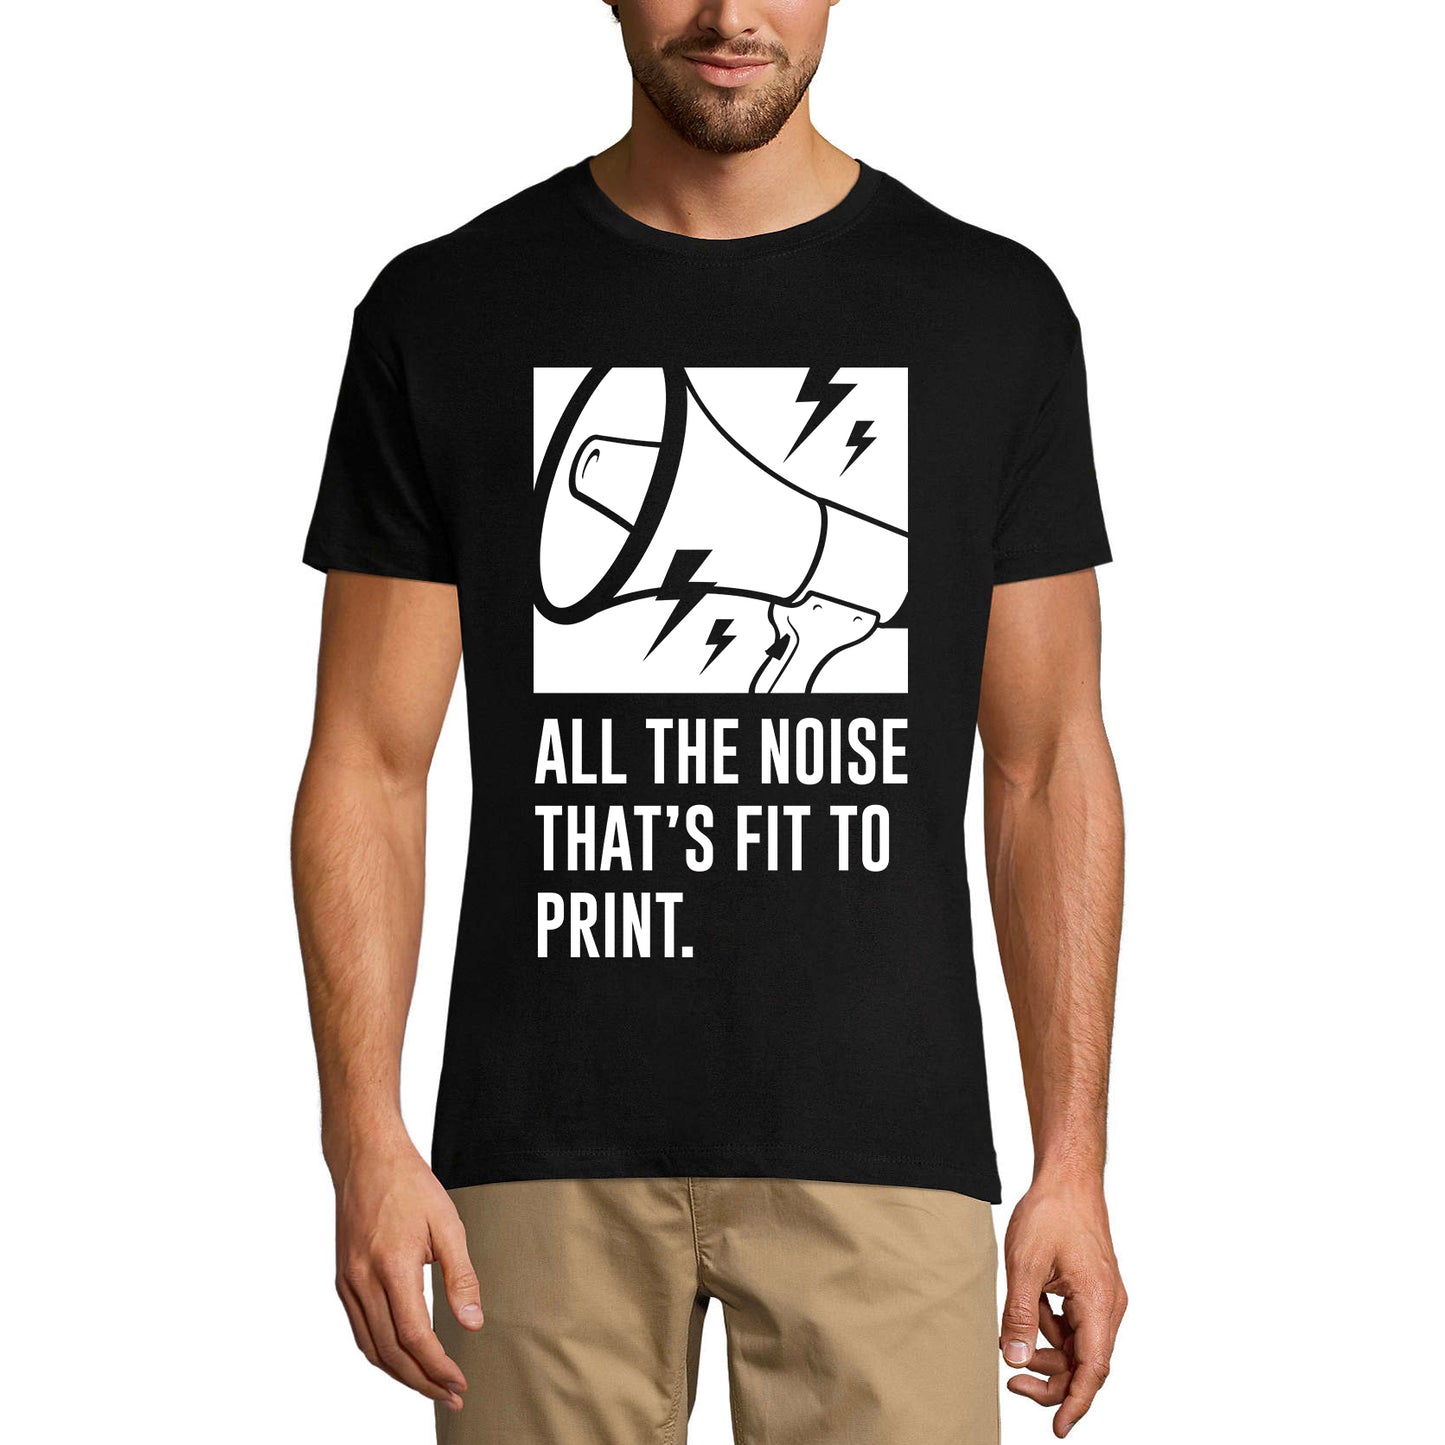 ULTRABASIC Men's T-Shirt All the Noise That's Fit to Print - Shirt for Musician